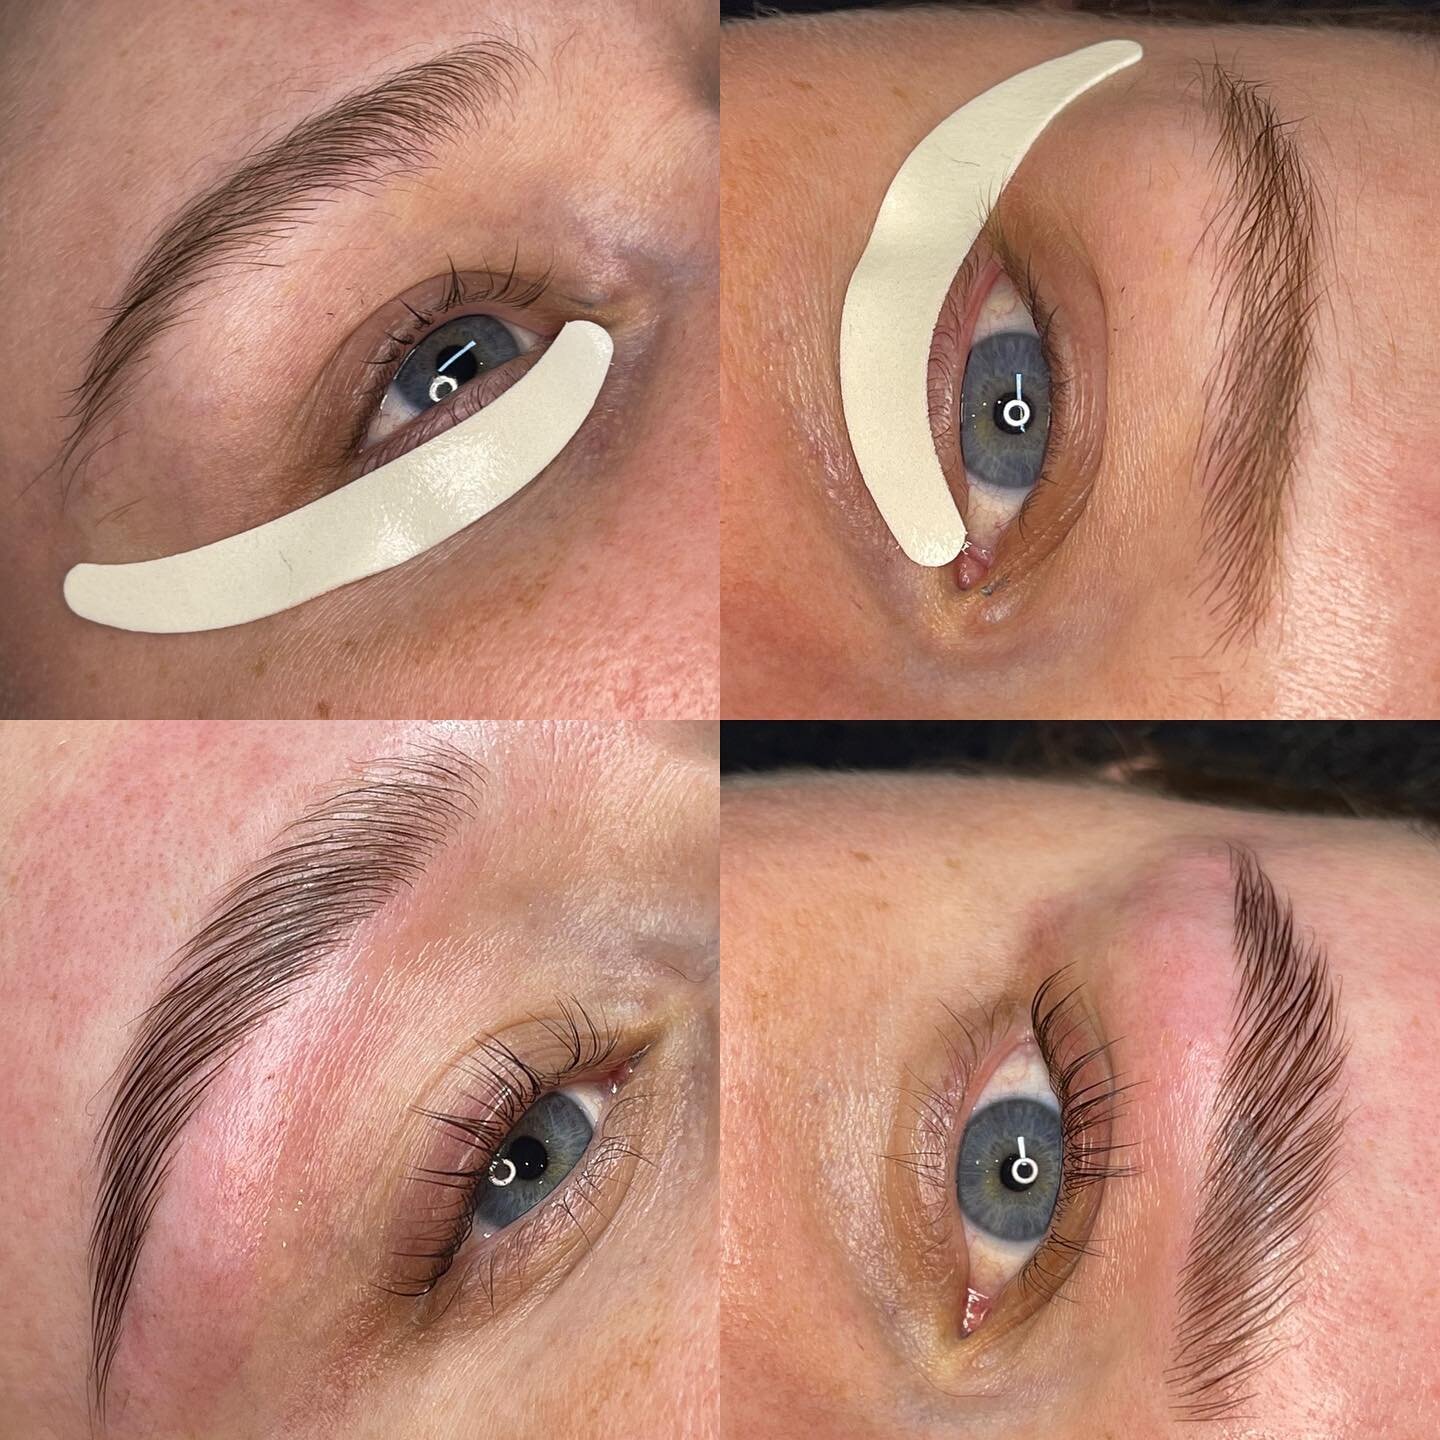 ✨Befores on top and afters on bottom✨ Full brow and eye make over. Consists on lash lift and tint, and a brow lamination, wax and tint. 

#lashes #lashlift #lashliftseattle #lashliftandtint #seattlelashes #brows #browlamination #browtint #browtransfo